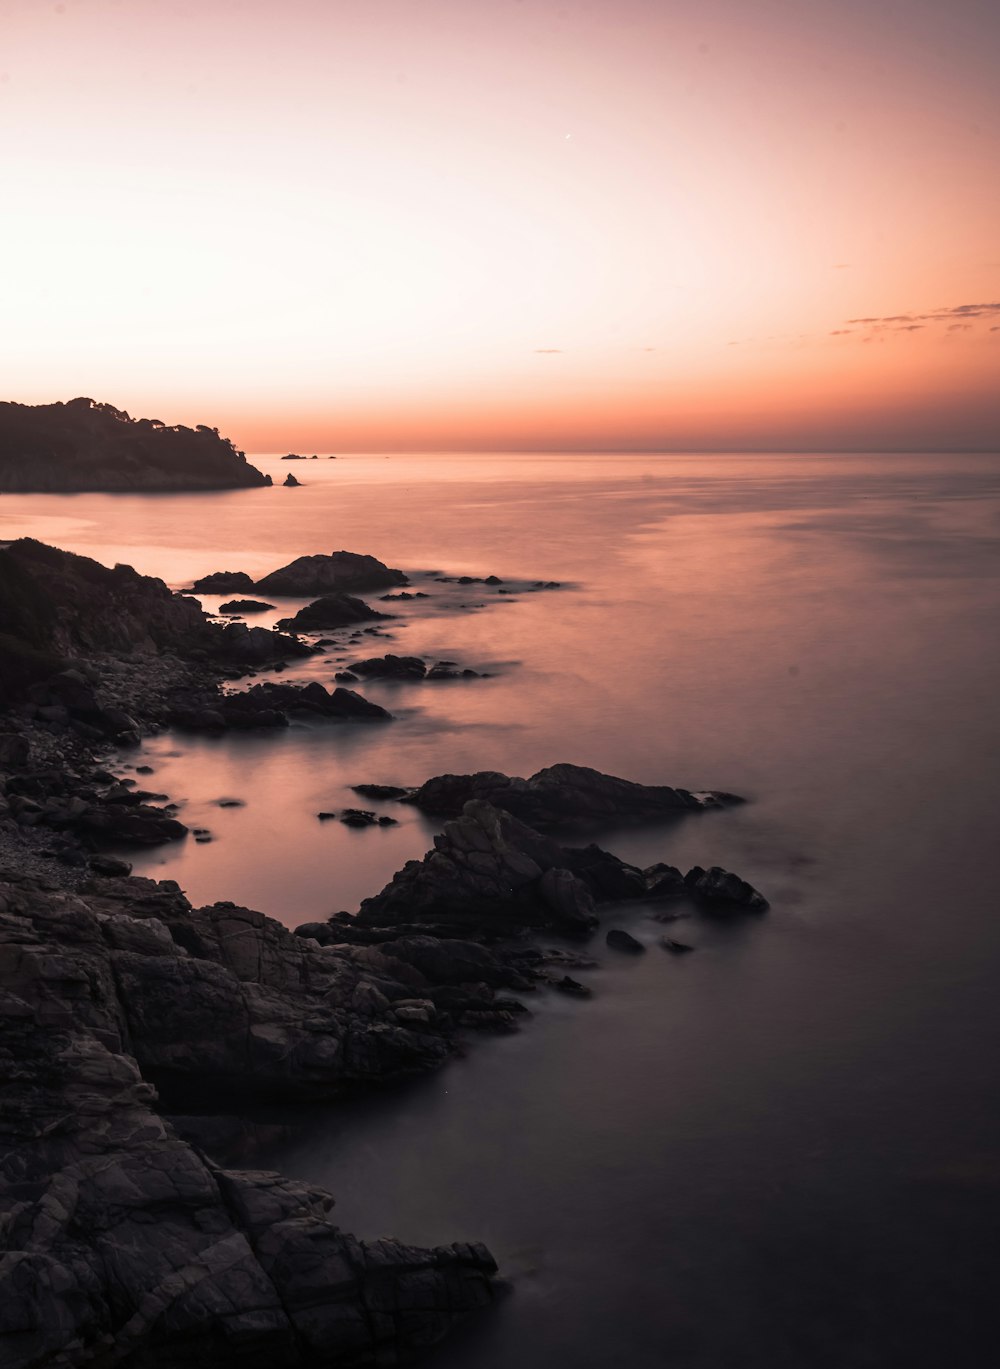 a long exposure of a sunset over the ocean